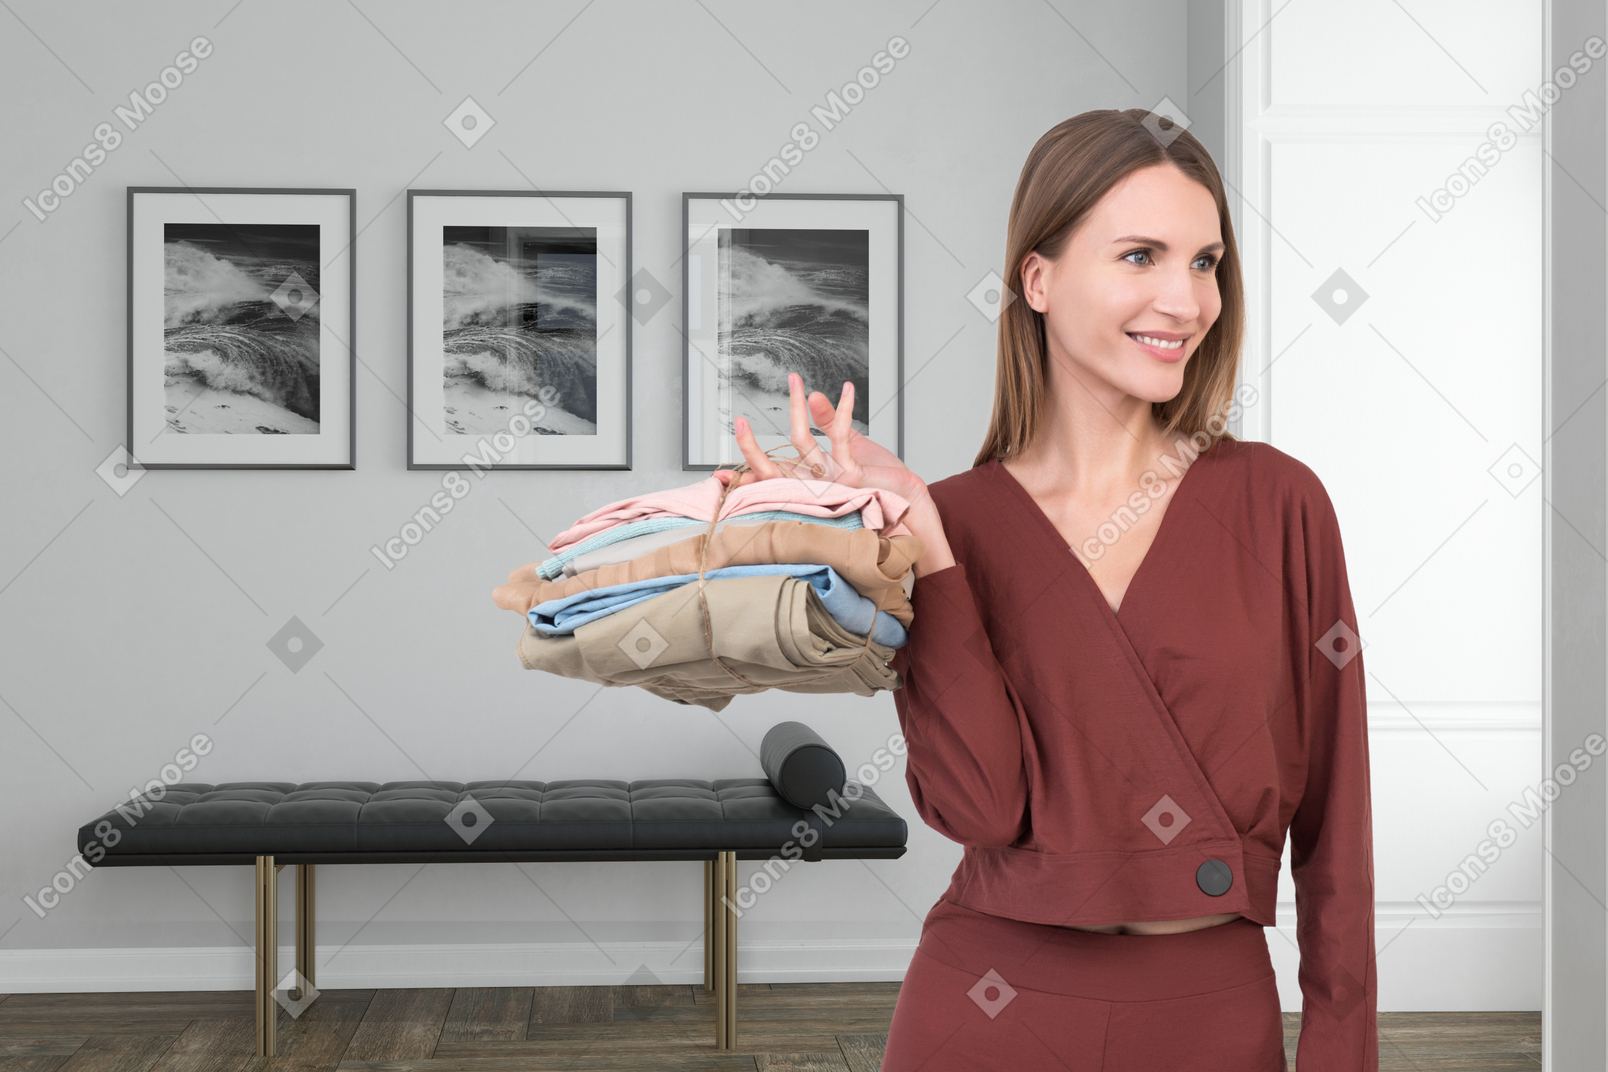 A woman holding a stack of clothes in a room